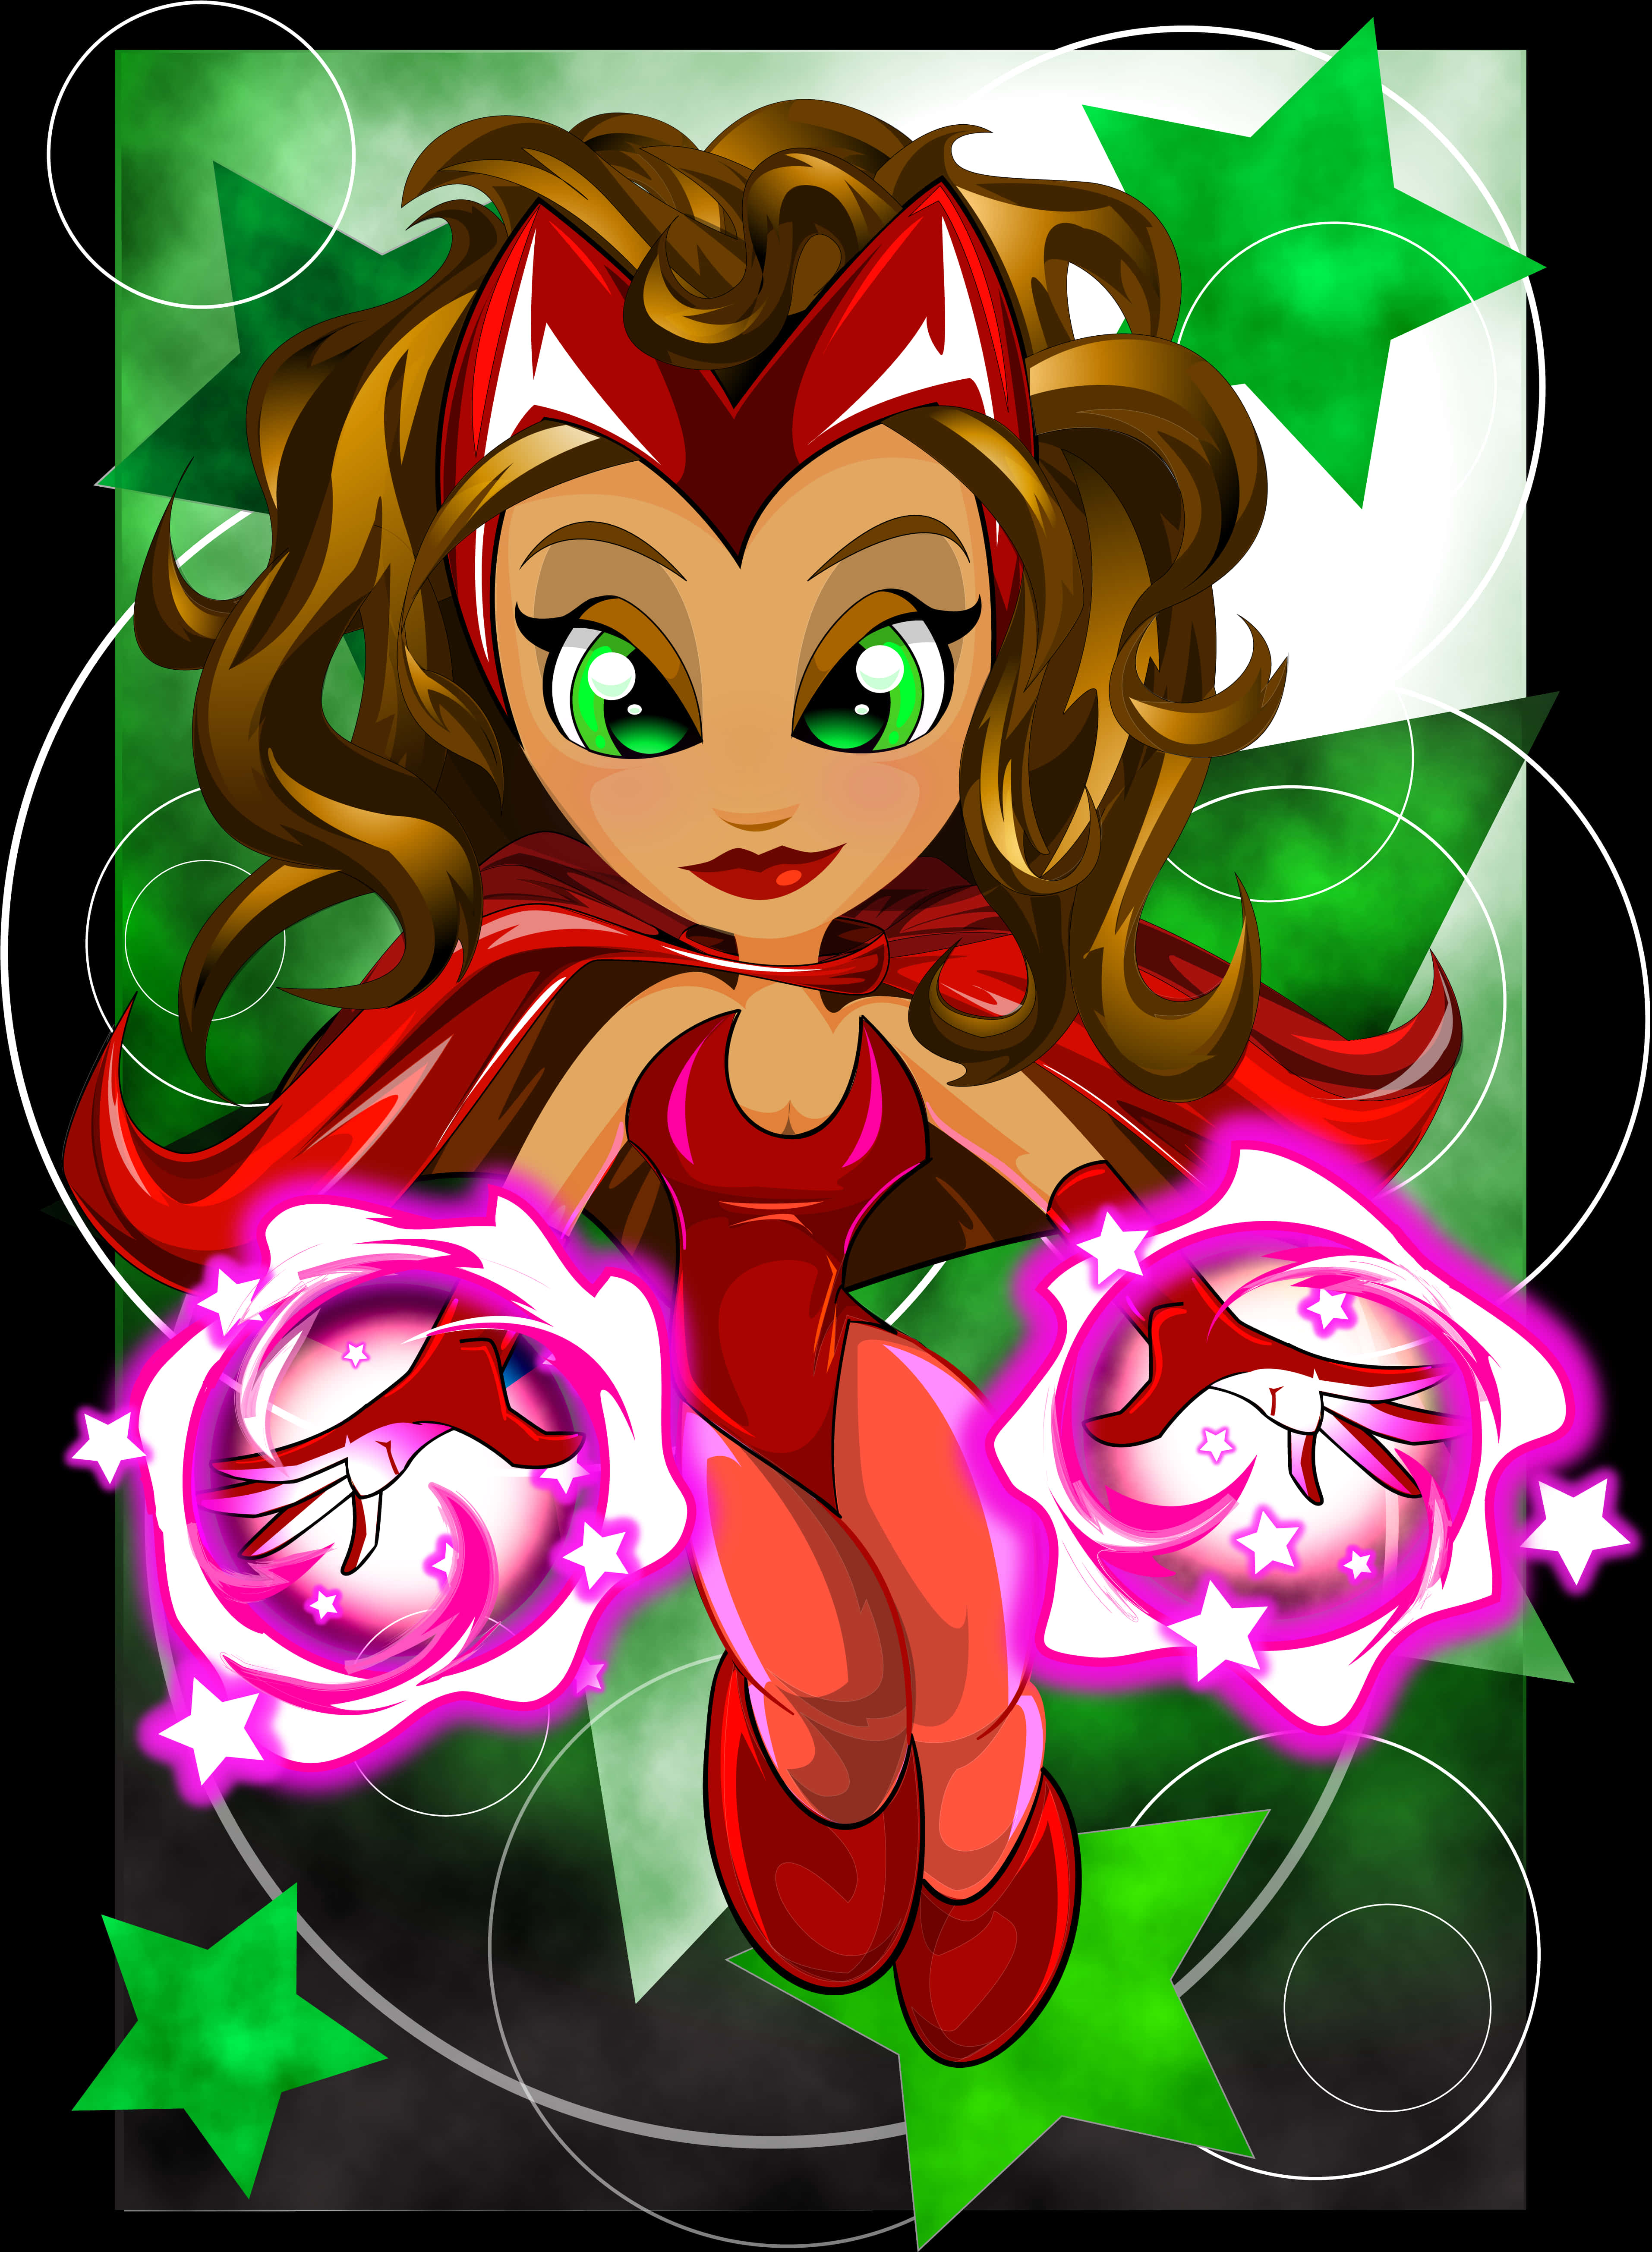 Chibi Style Scarlet Witch Artwork PNG